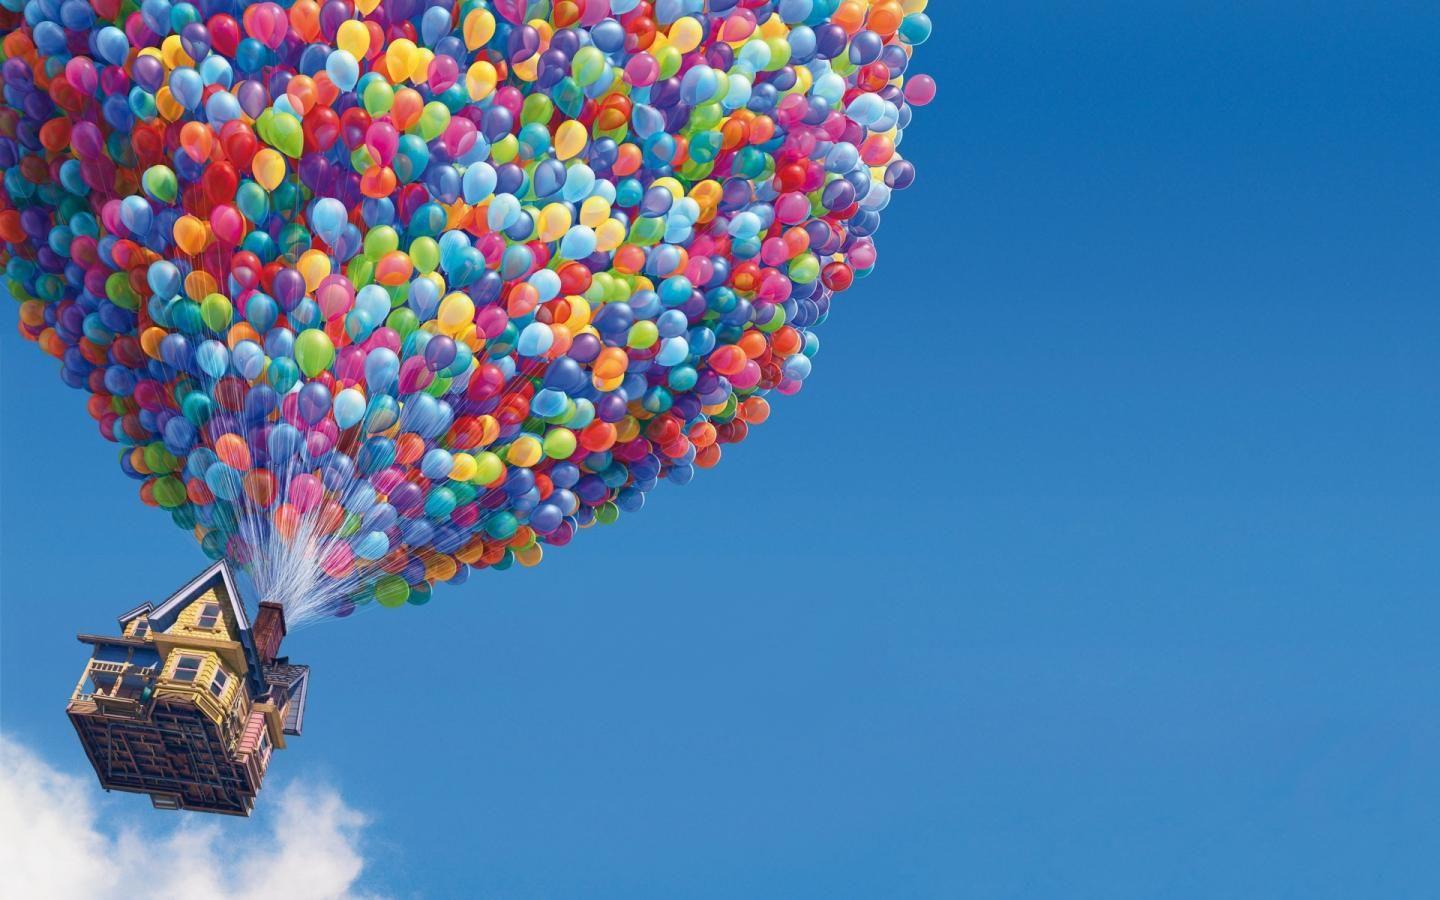 Up Movie Full HD Quality Background, Up Movie Wallpaper